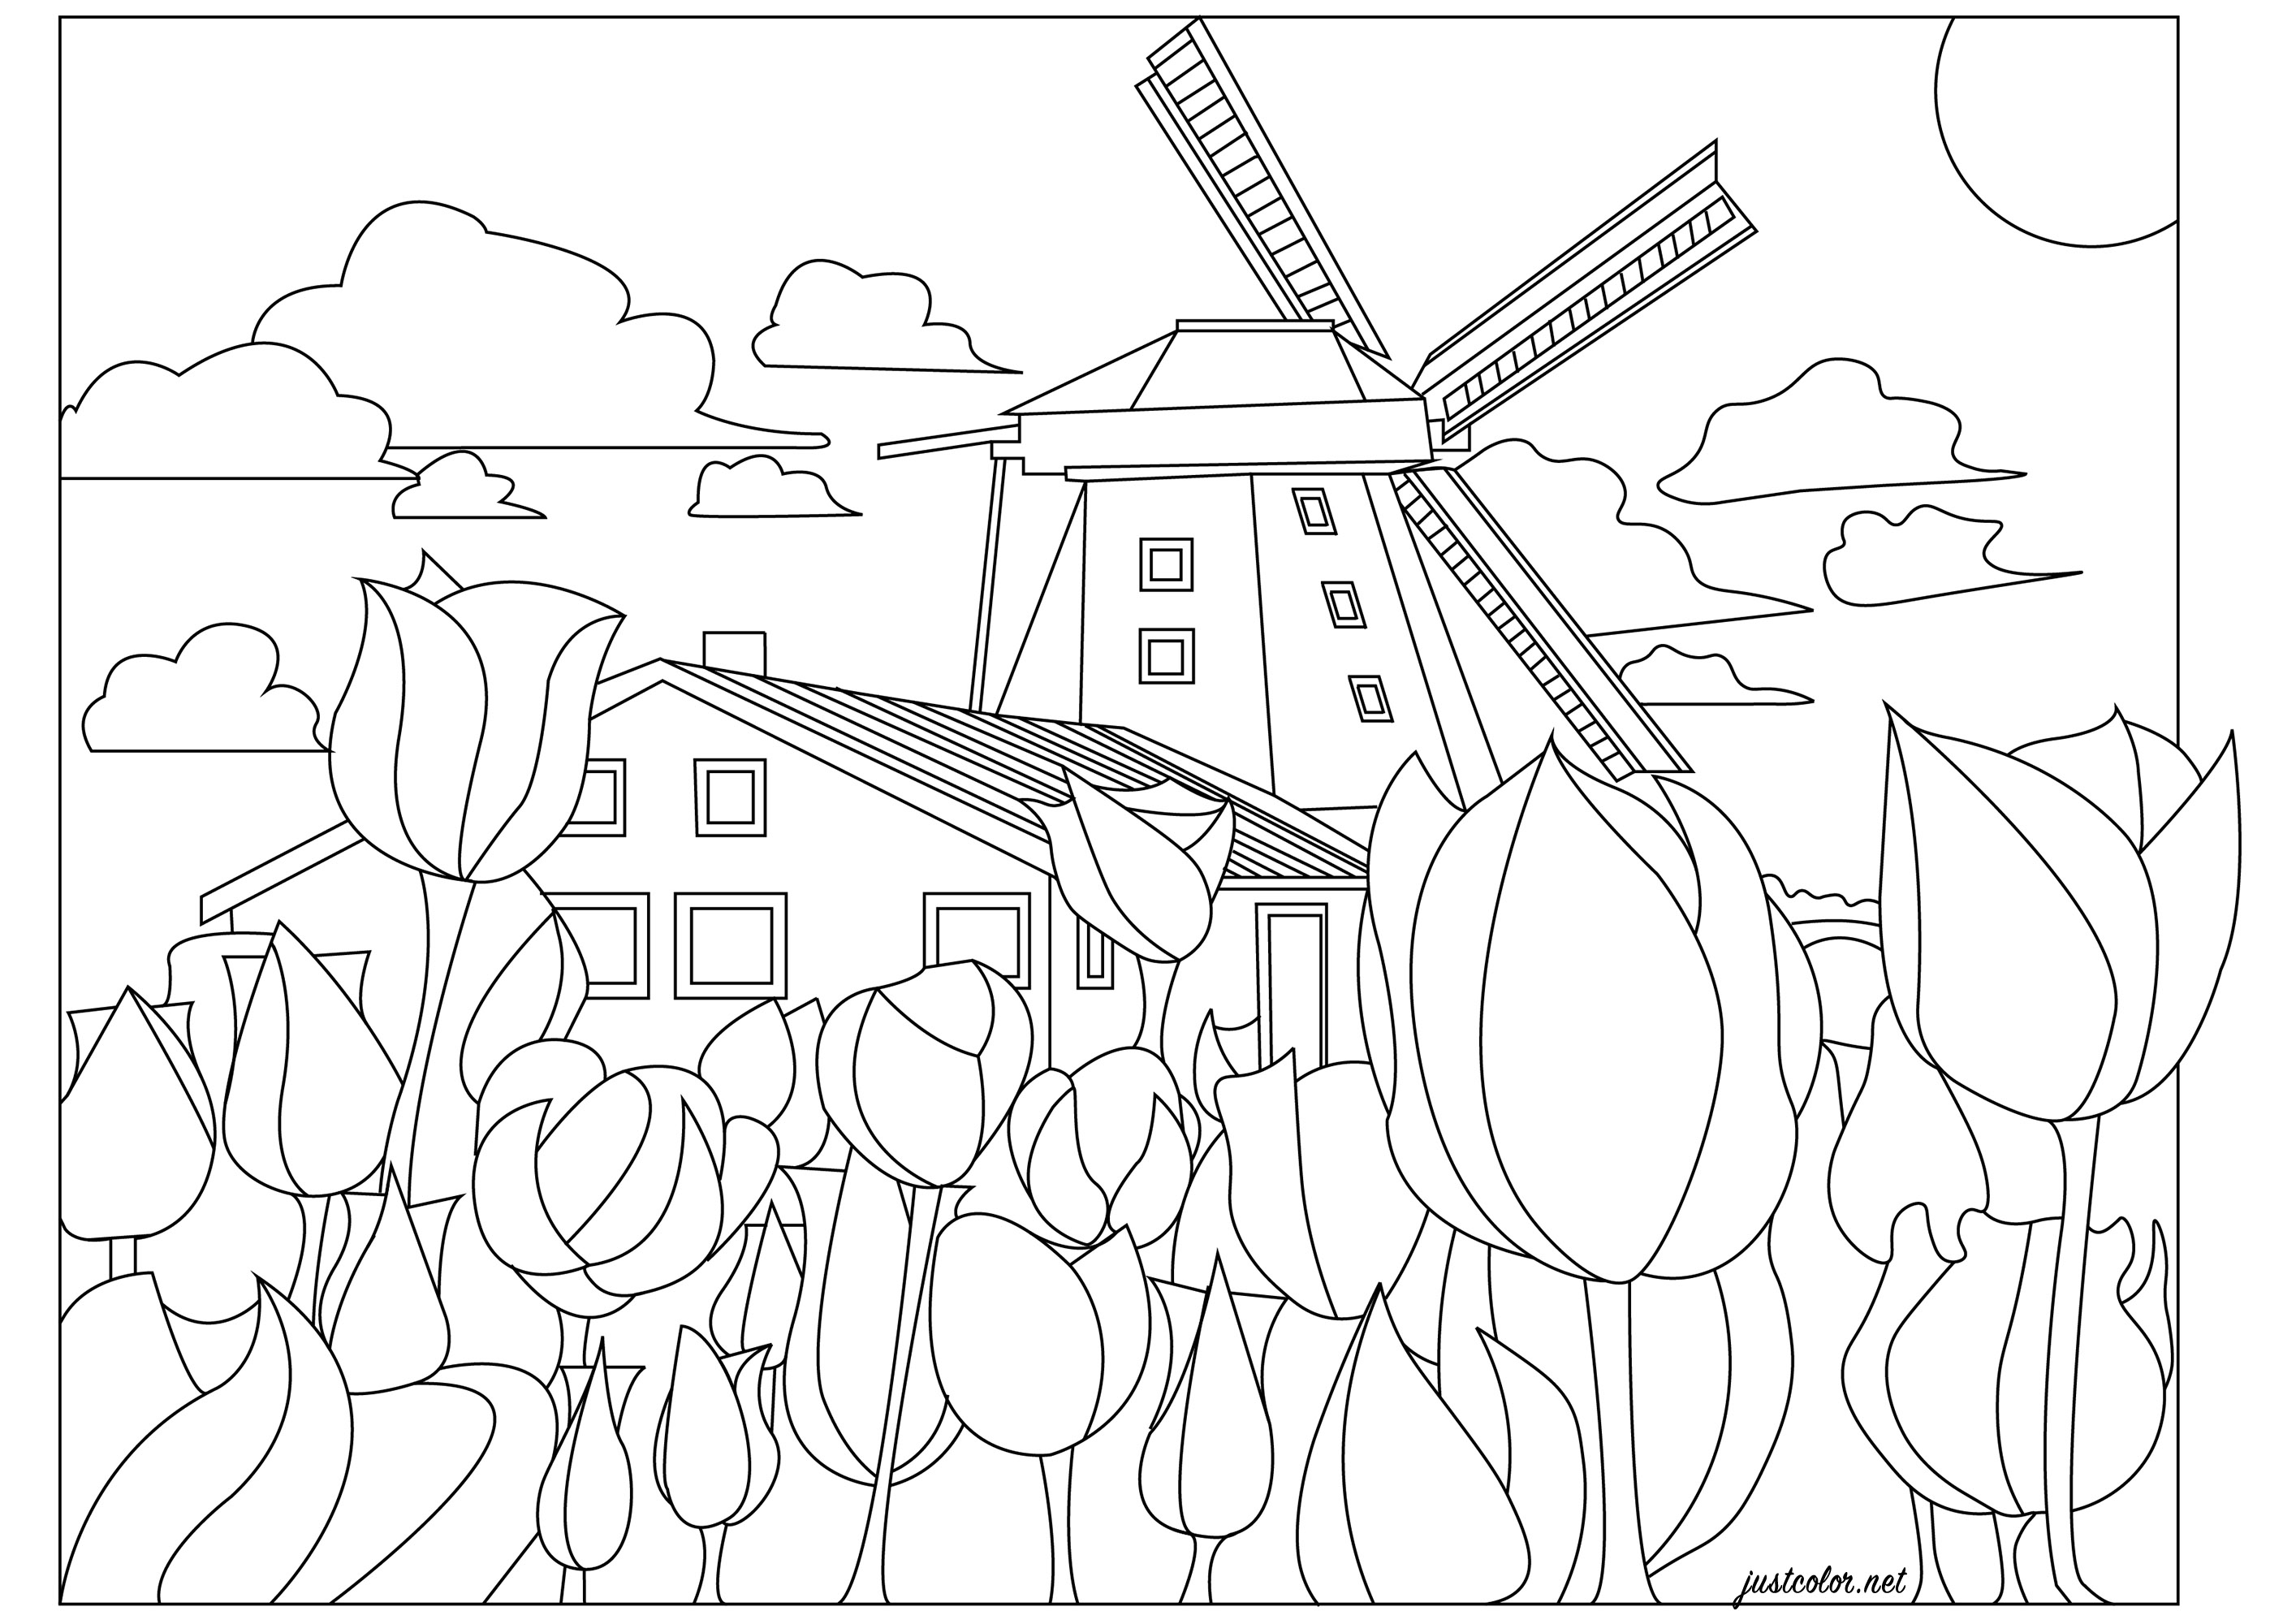 The Netherlands, the pretty country of windmills and tulip fields. The Dutch countryside in the spring! A coloring page with colorful flowers, a windmill and a typical Dutch house